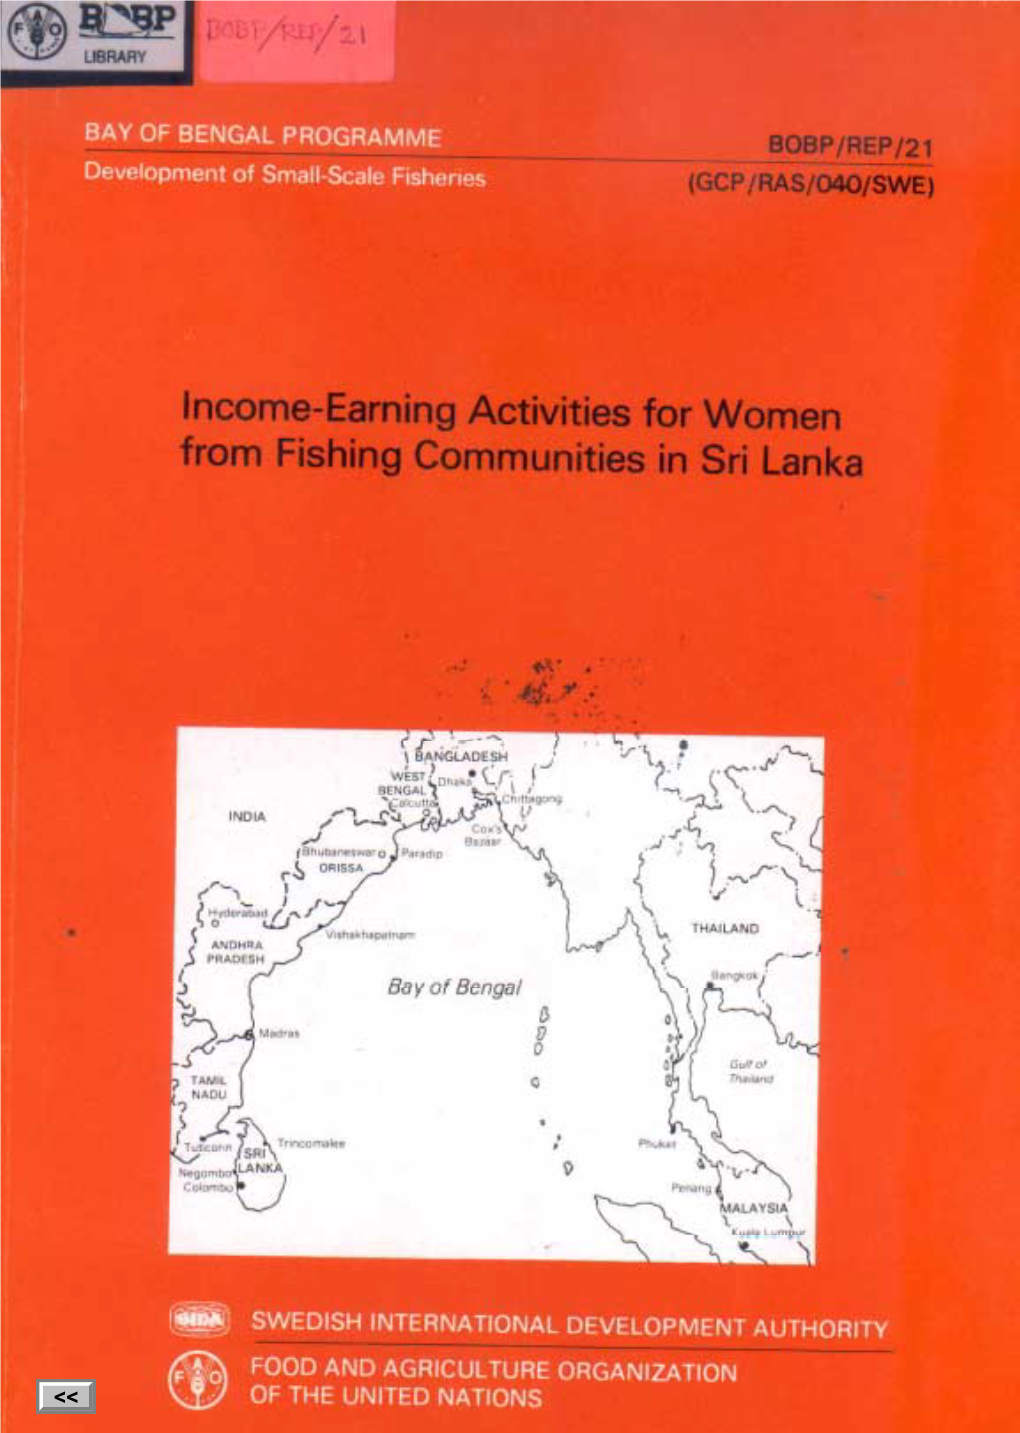 Income-Earning Activities for Women from Fishing Communities in Sri Lanka BAY of BENGAL PROGRAMME BOBP/REP/21 Development of Small-Scale Fisheries GCP/RAS/040/SWE